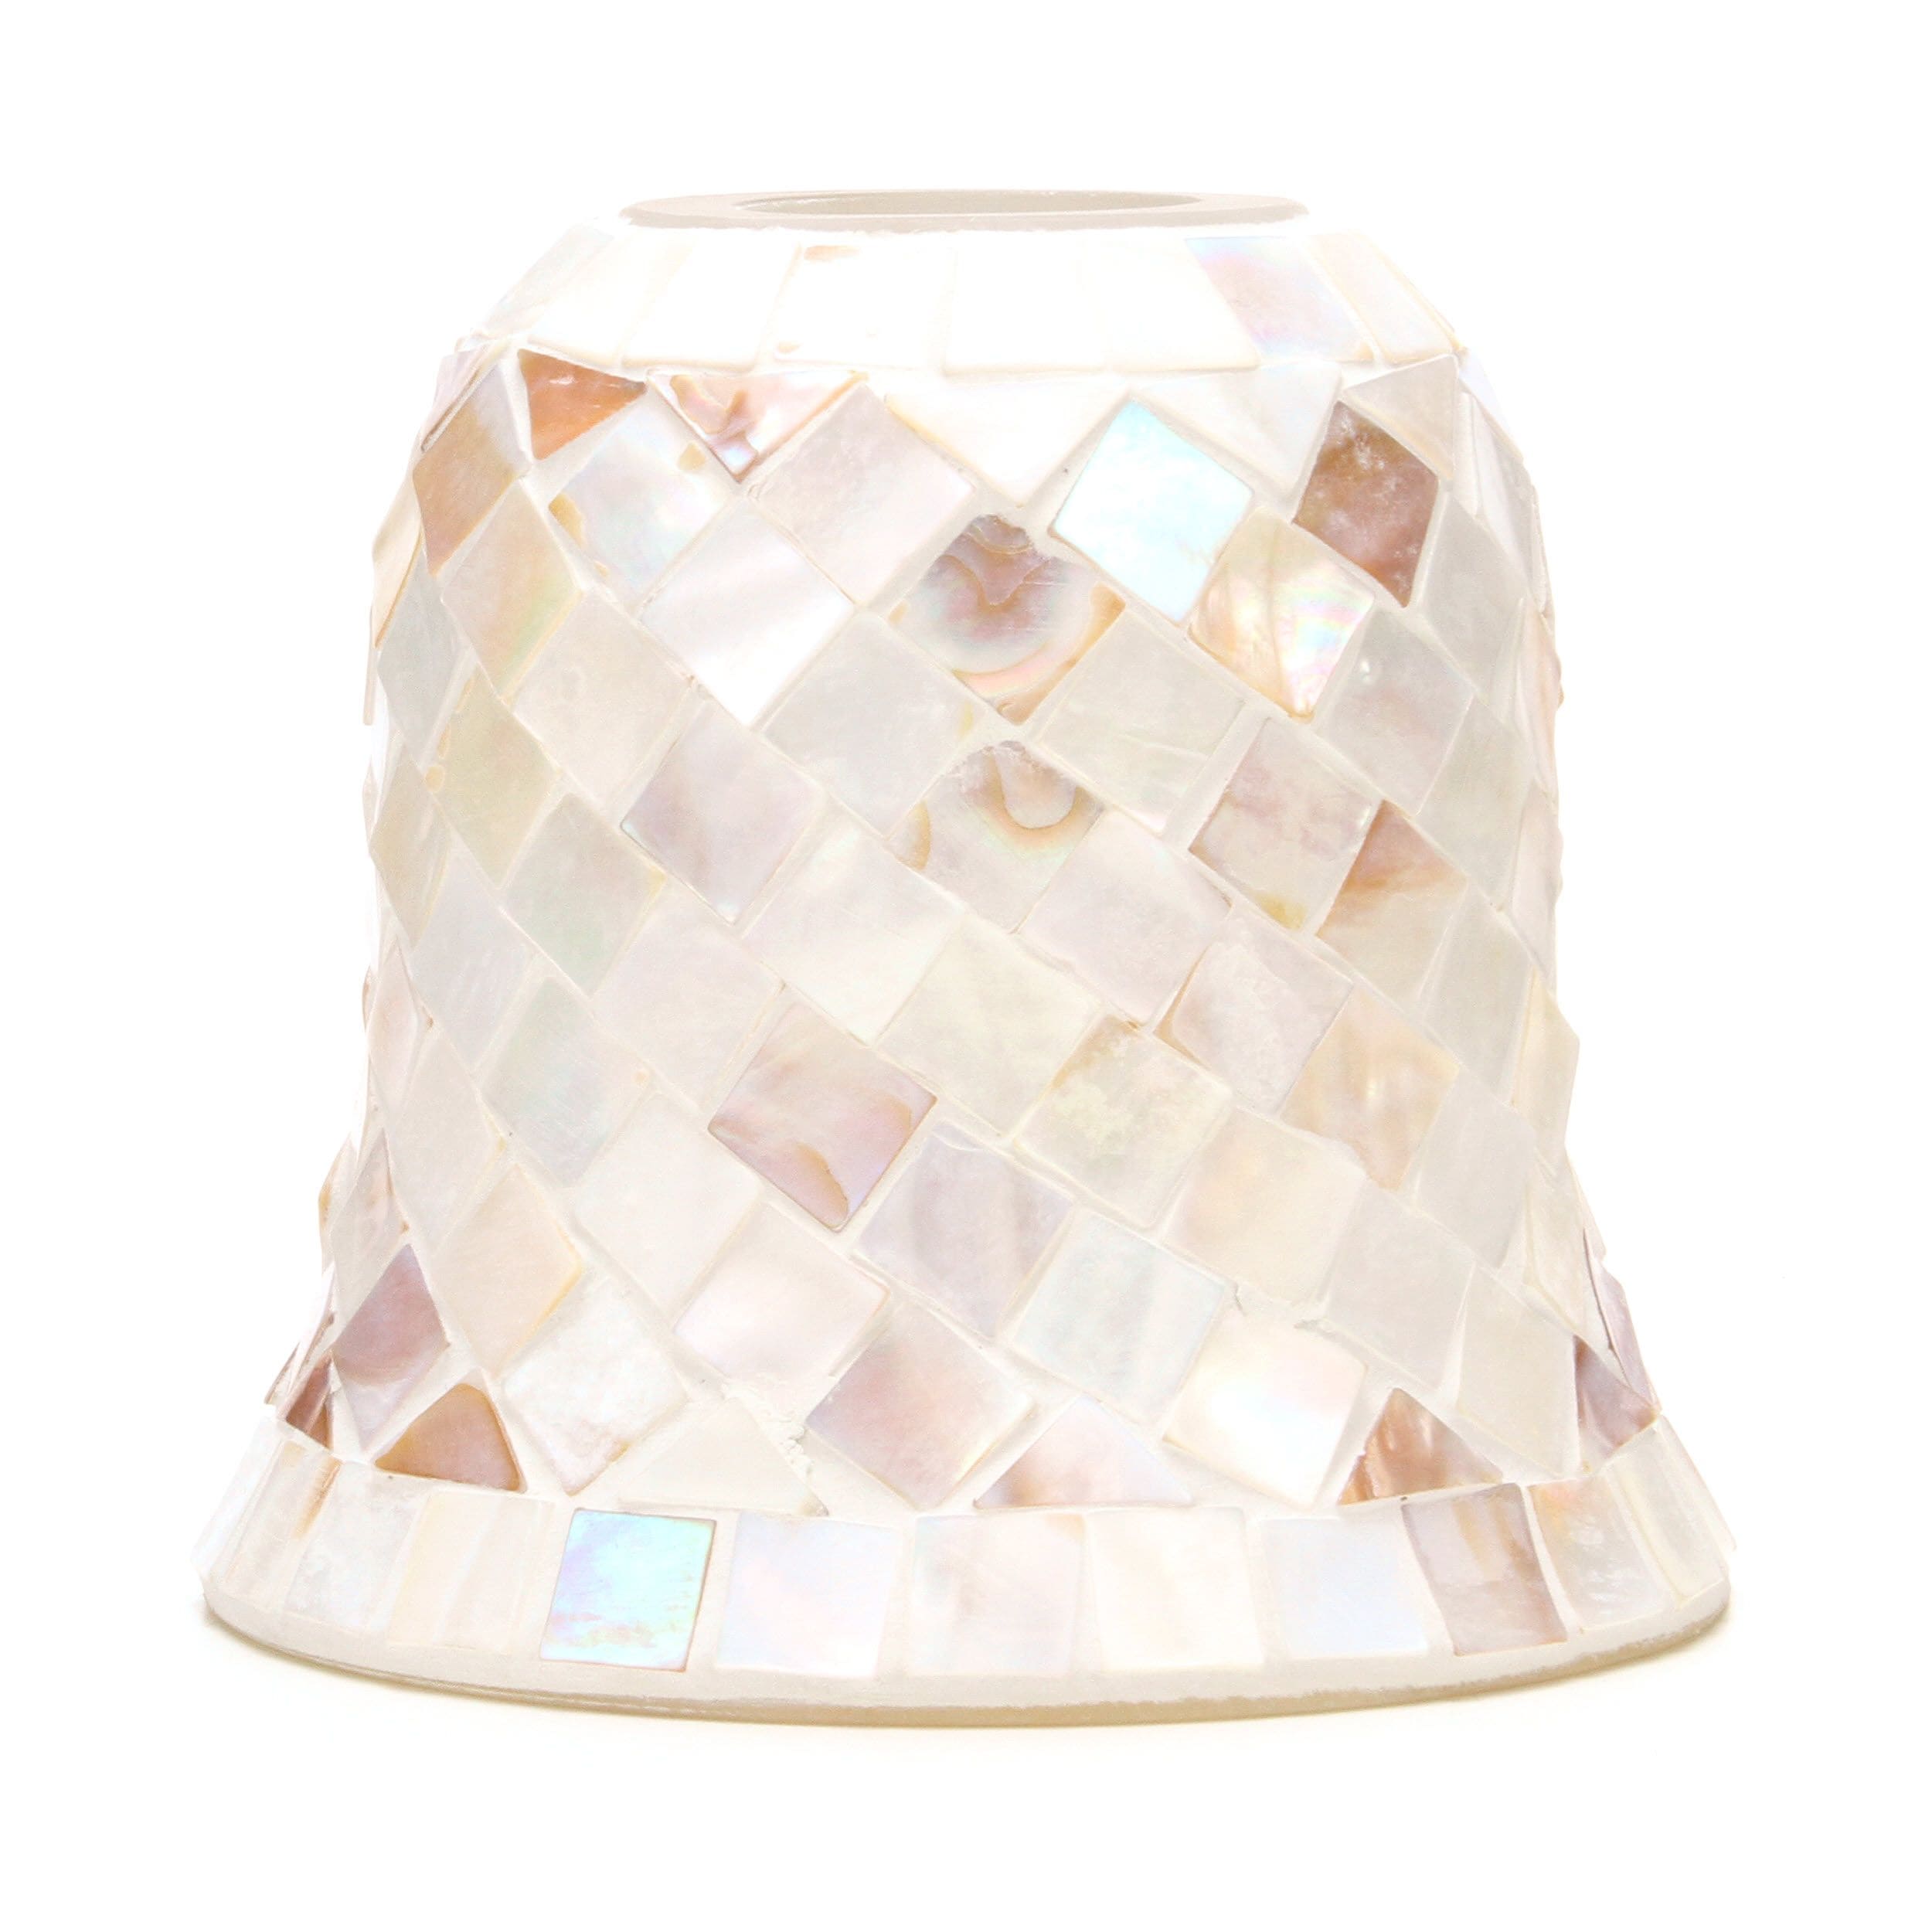 CHOICE OF 17 INSIDE COLOURS GREY & WHITE GEOMETRIC TRIANGLE LAMPSHADE 